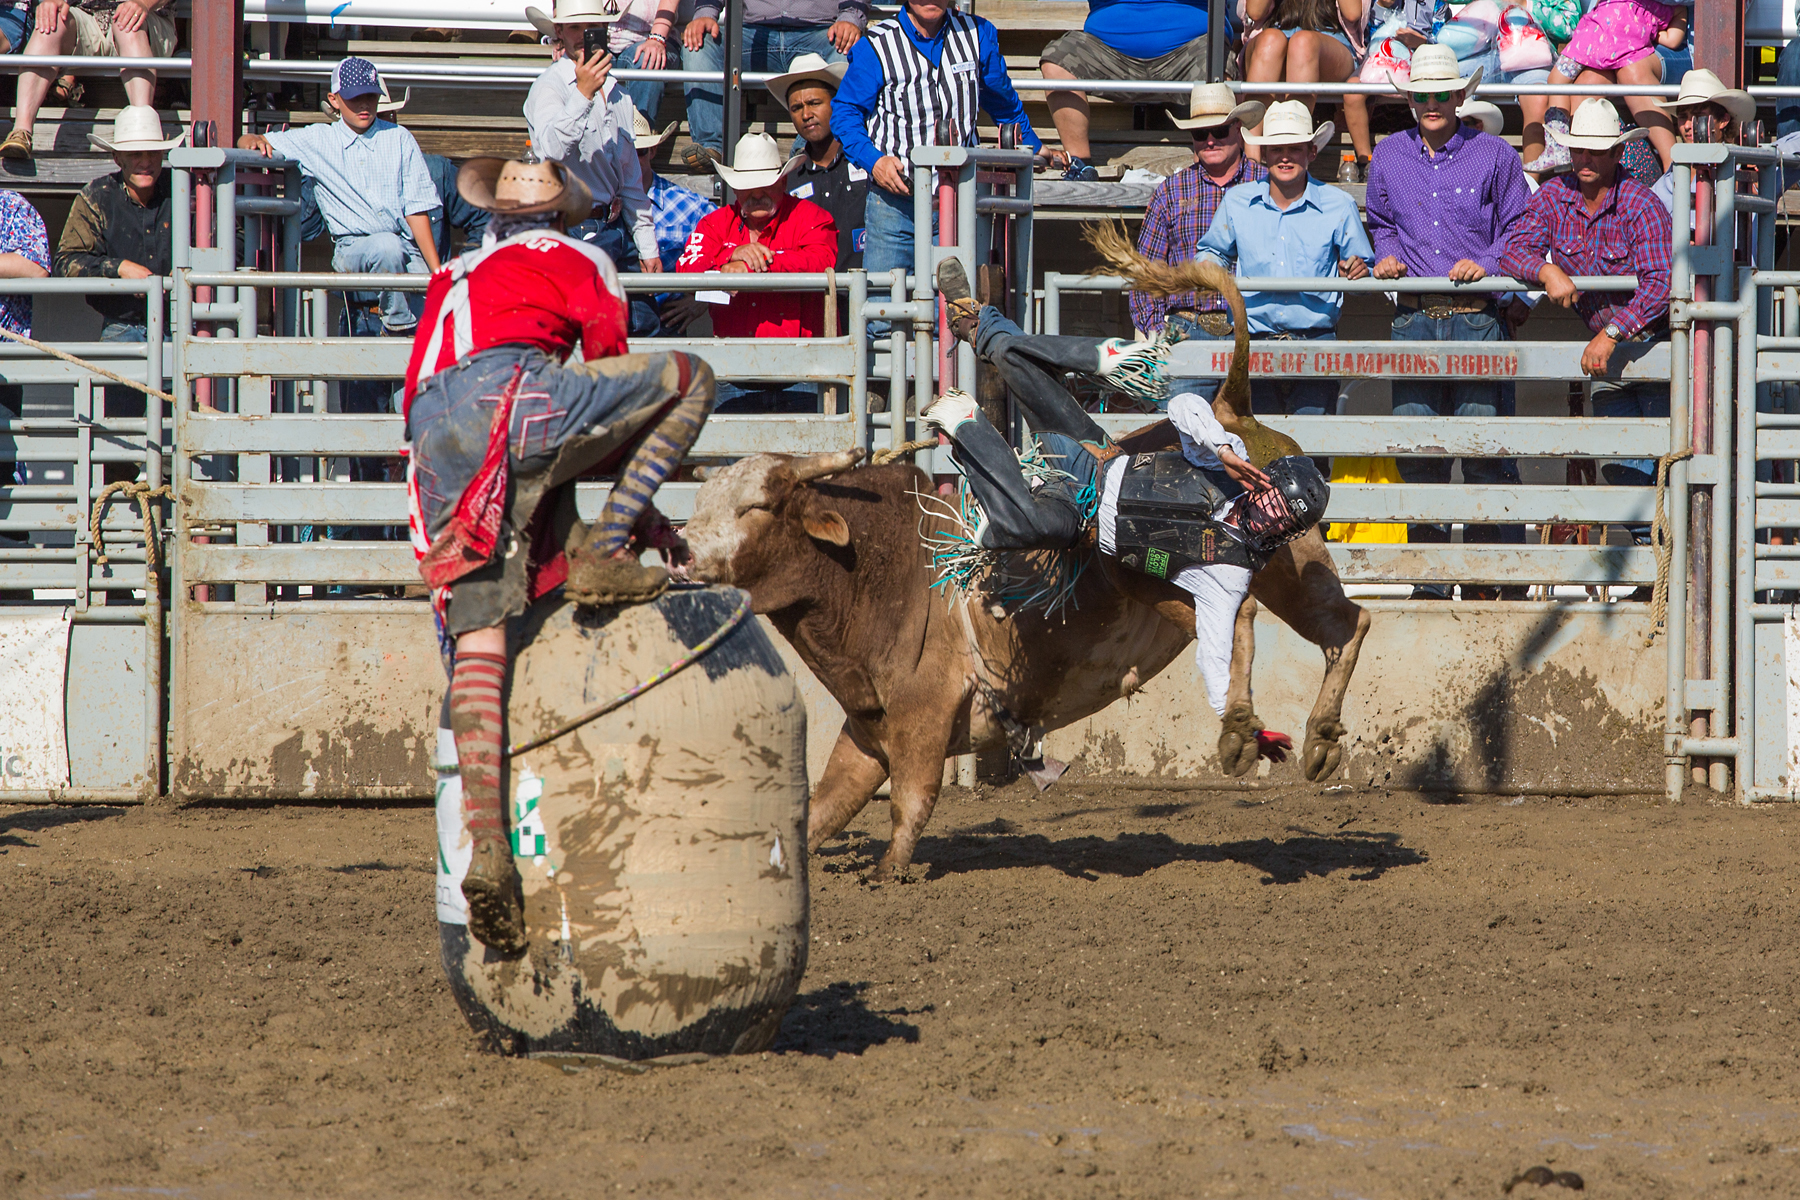 Bull riding at Home of Champions Rodeo, Red Lodge, MT, July 4, 2021.  Click for next photo.